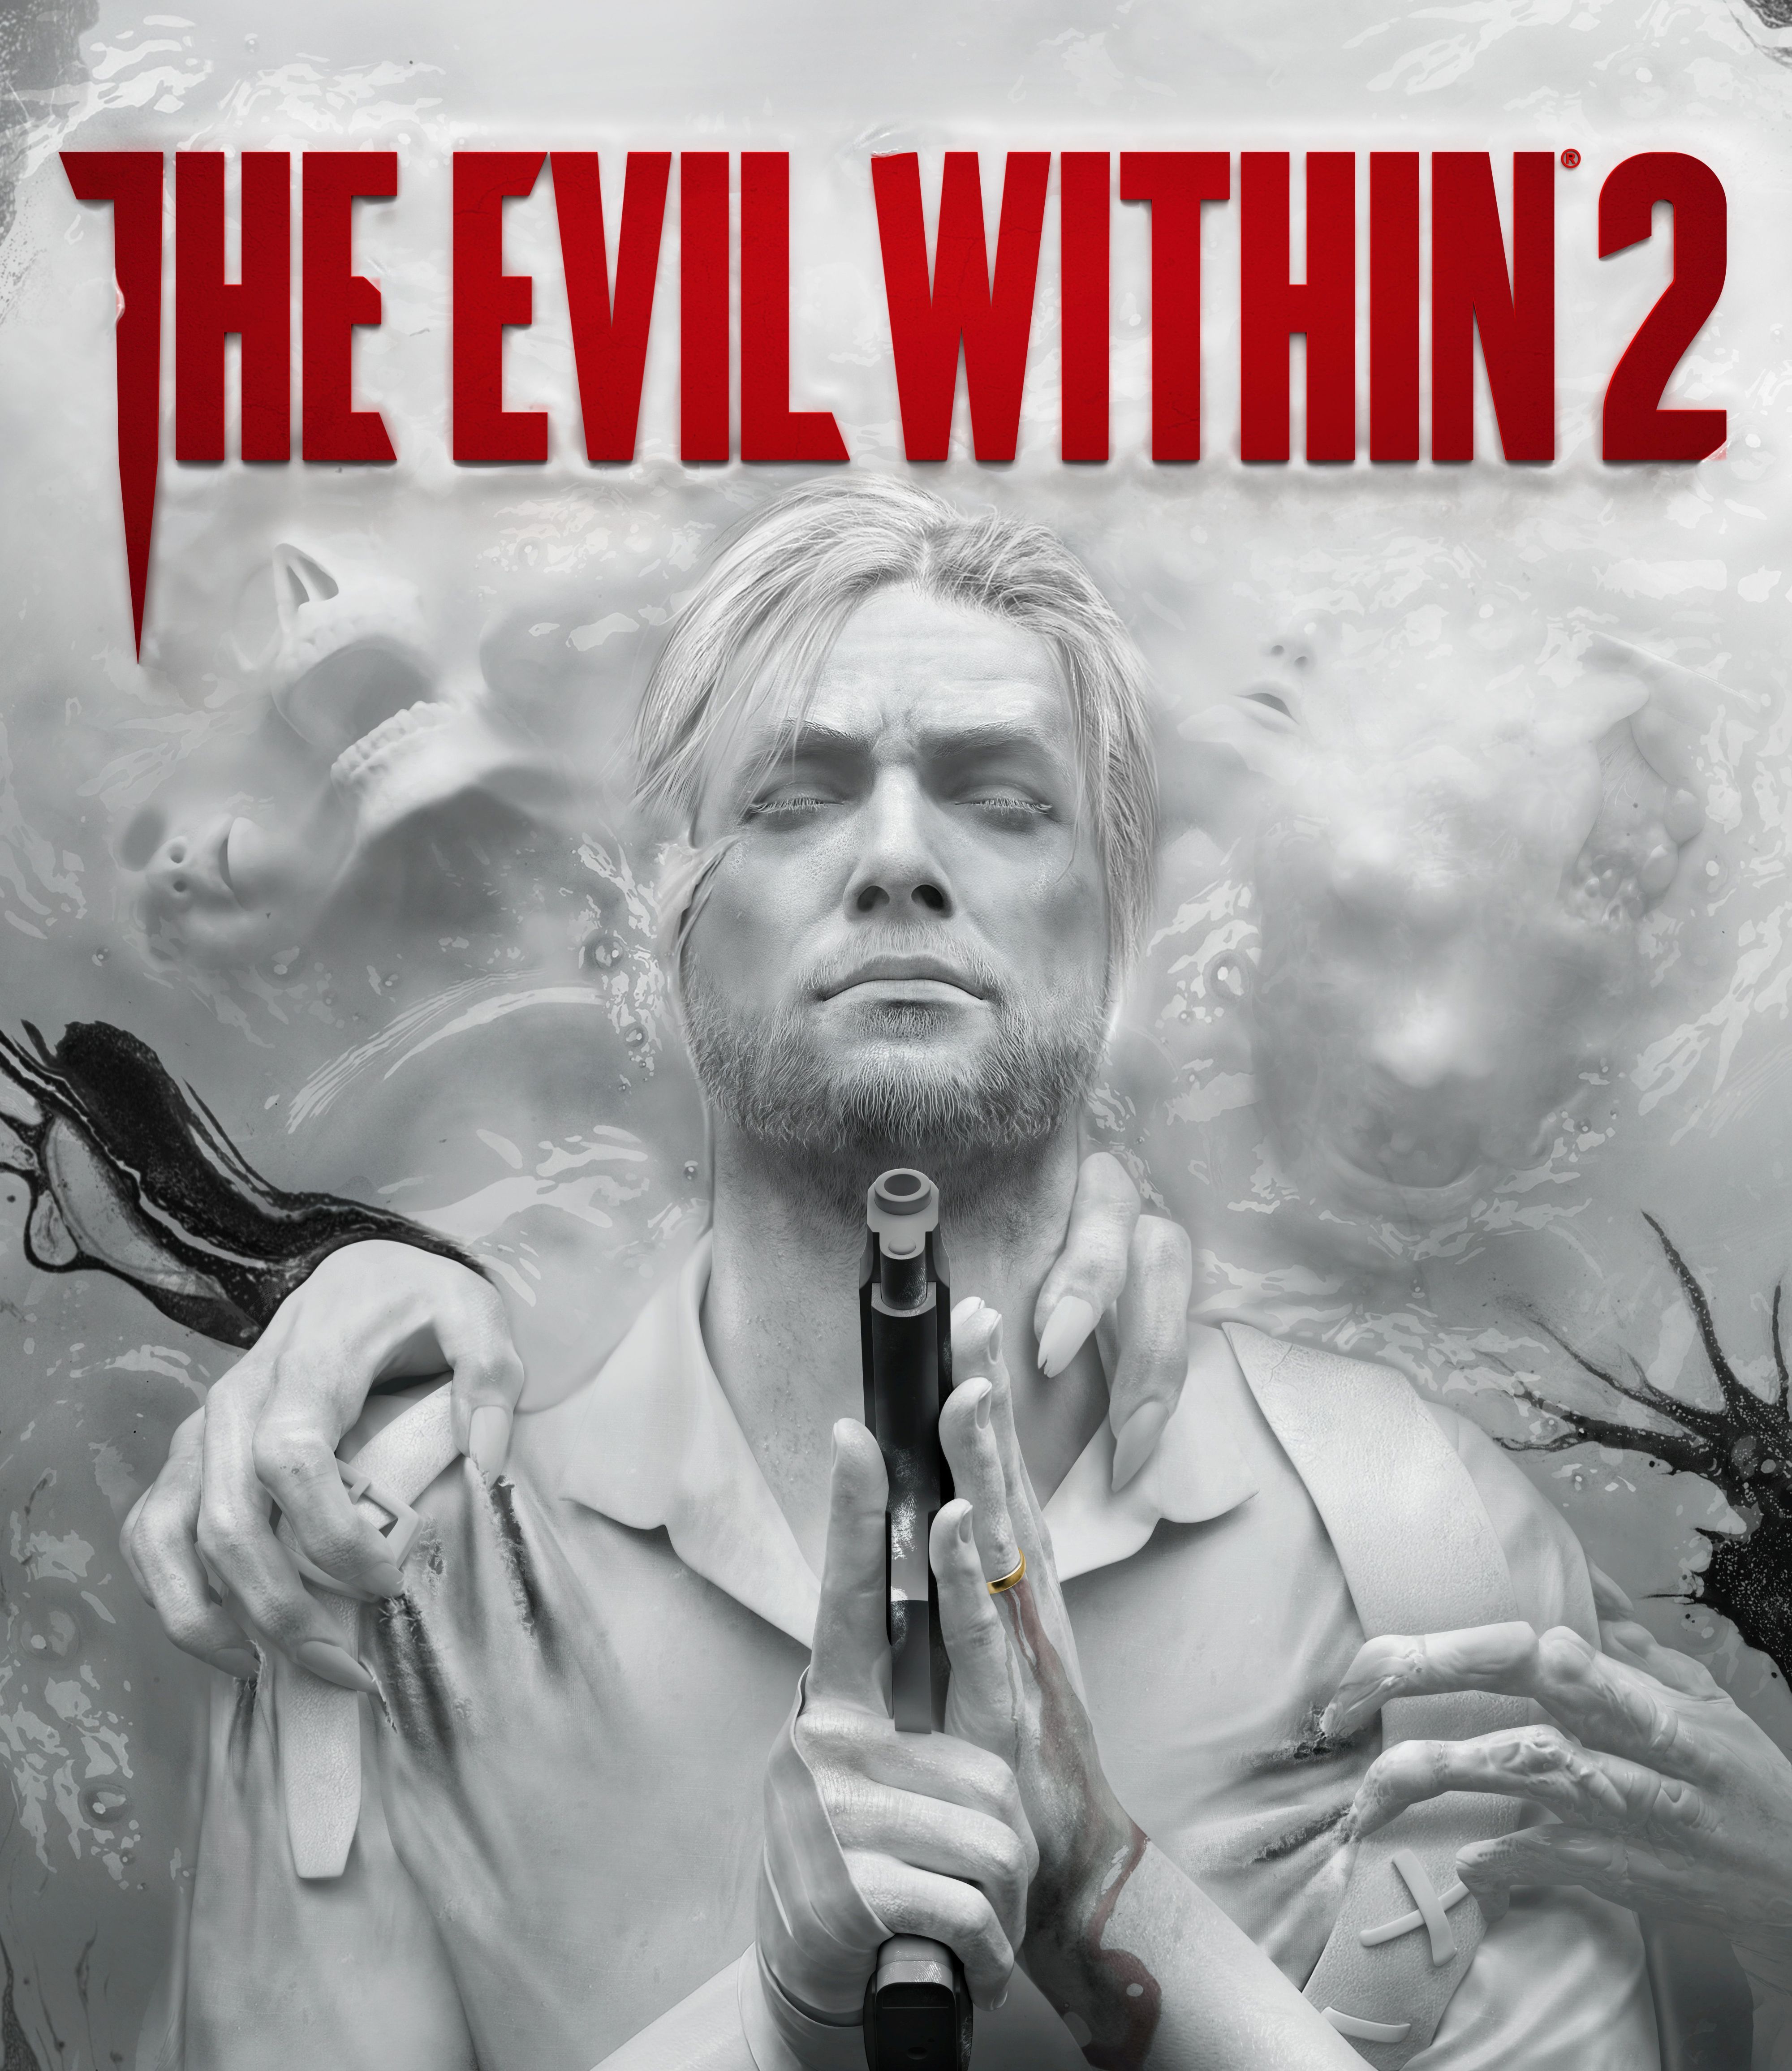 download free the evil within game